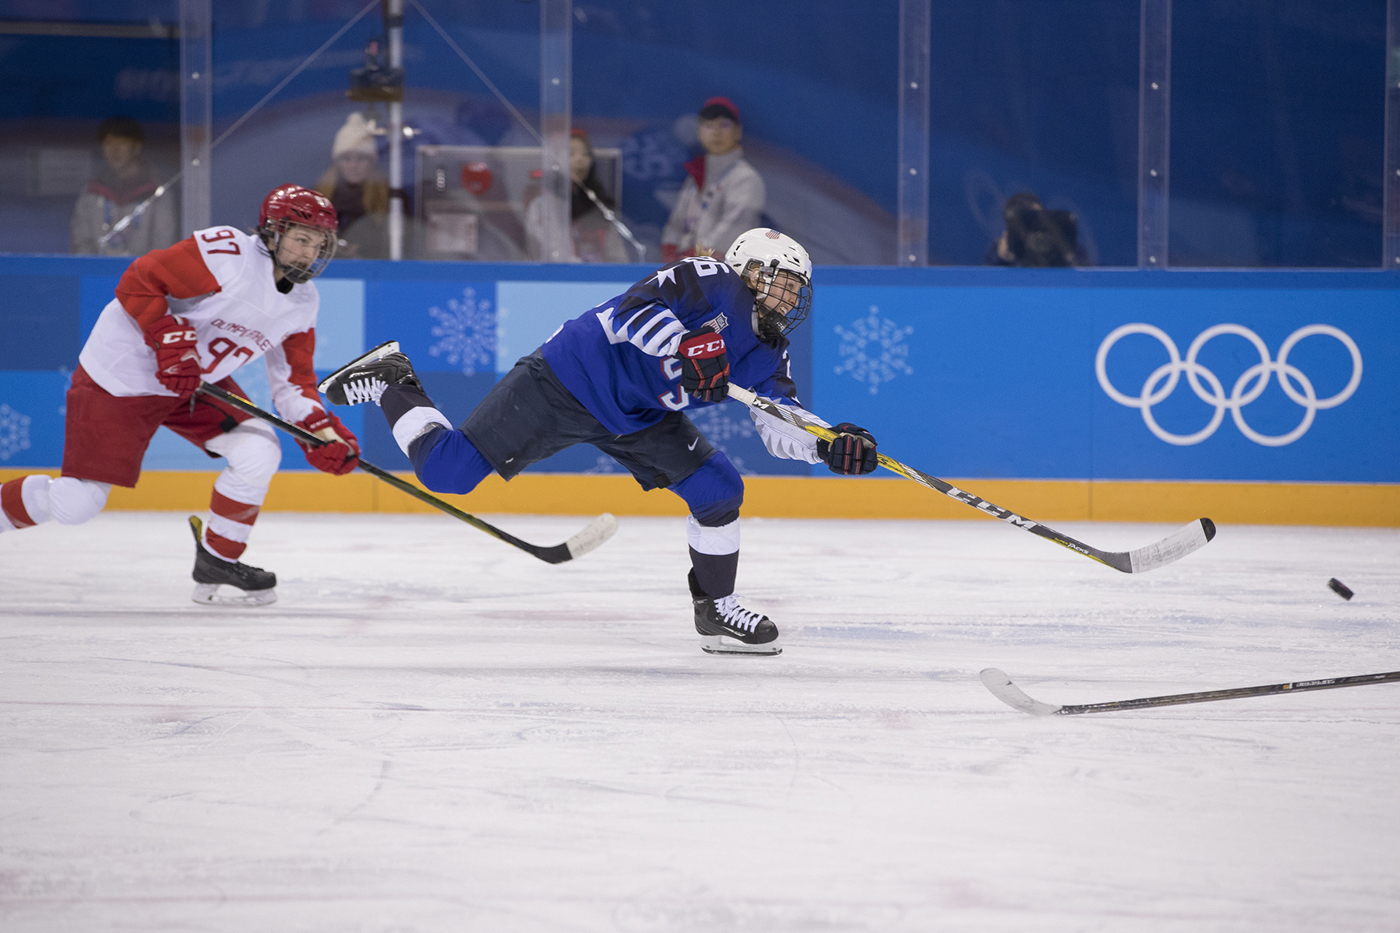 Northeastern women’s hockey on the world stage in Olympic finals